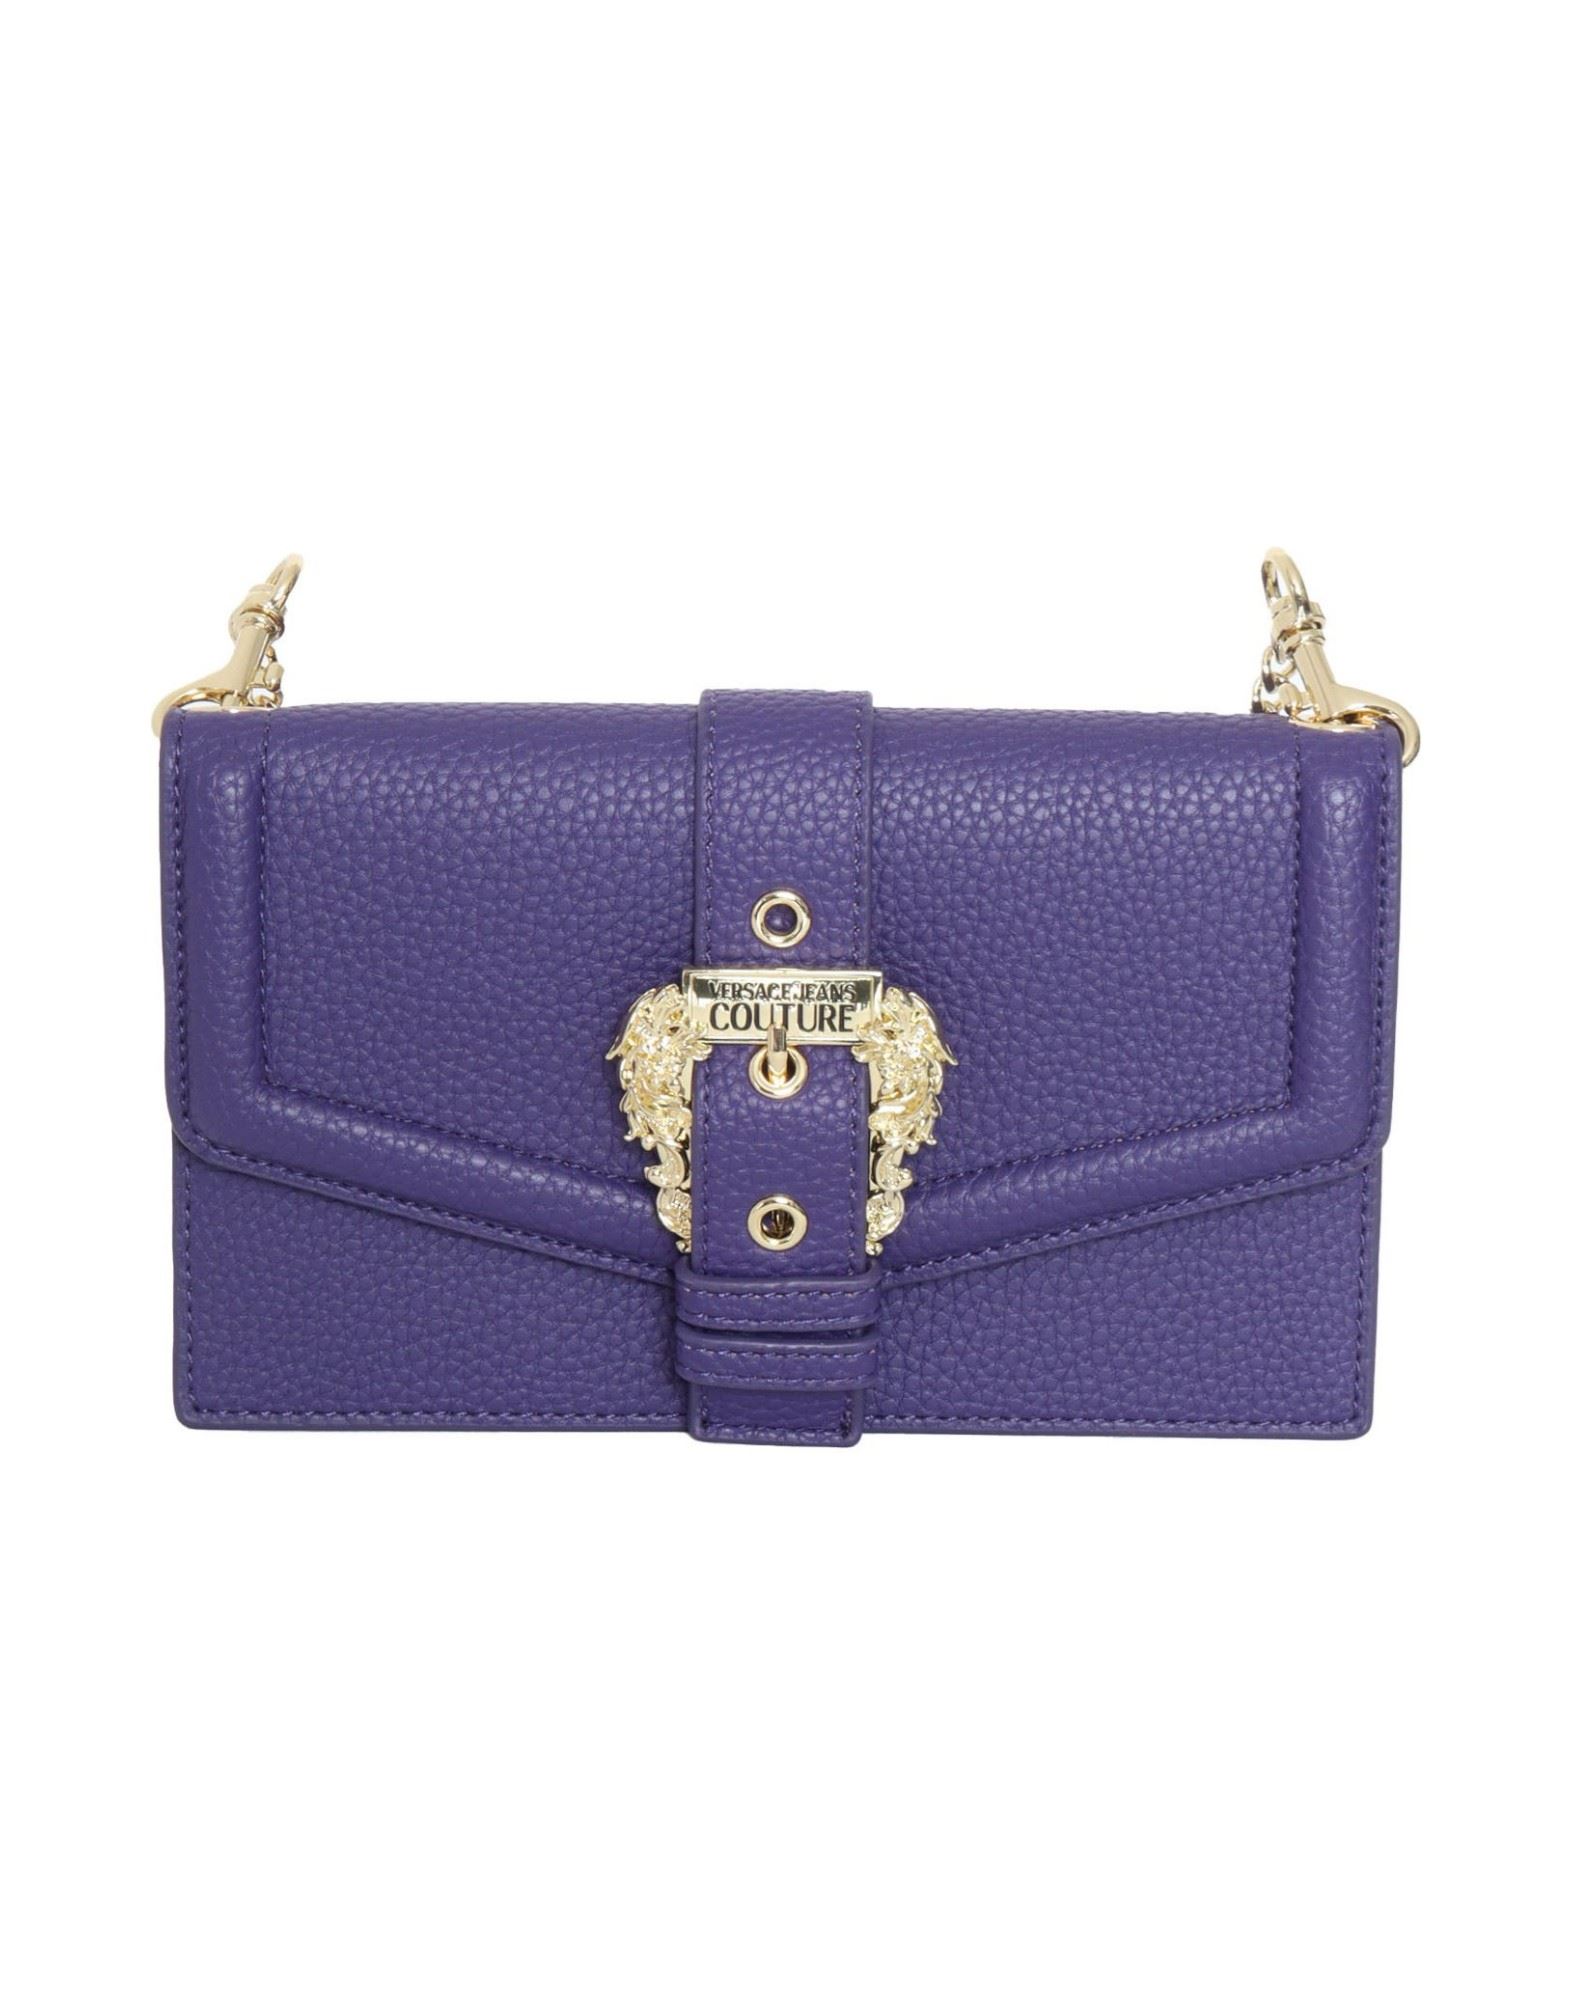 VERSACE JEANS COUTURE Brieftasche Kinder Violett von VERSACE JEANS COUTURE